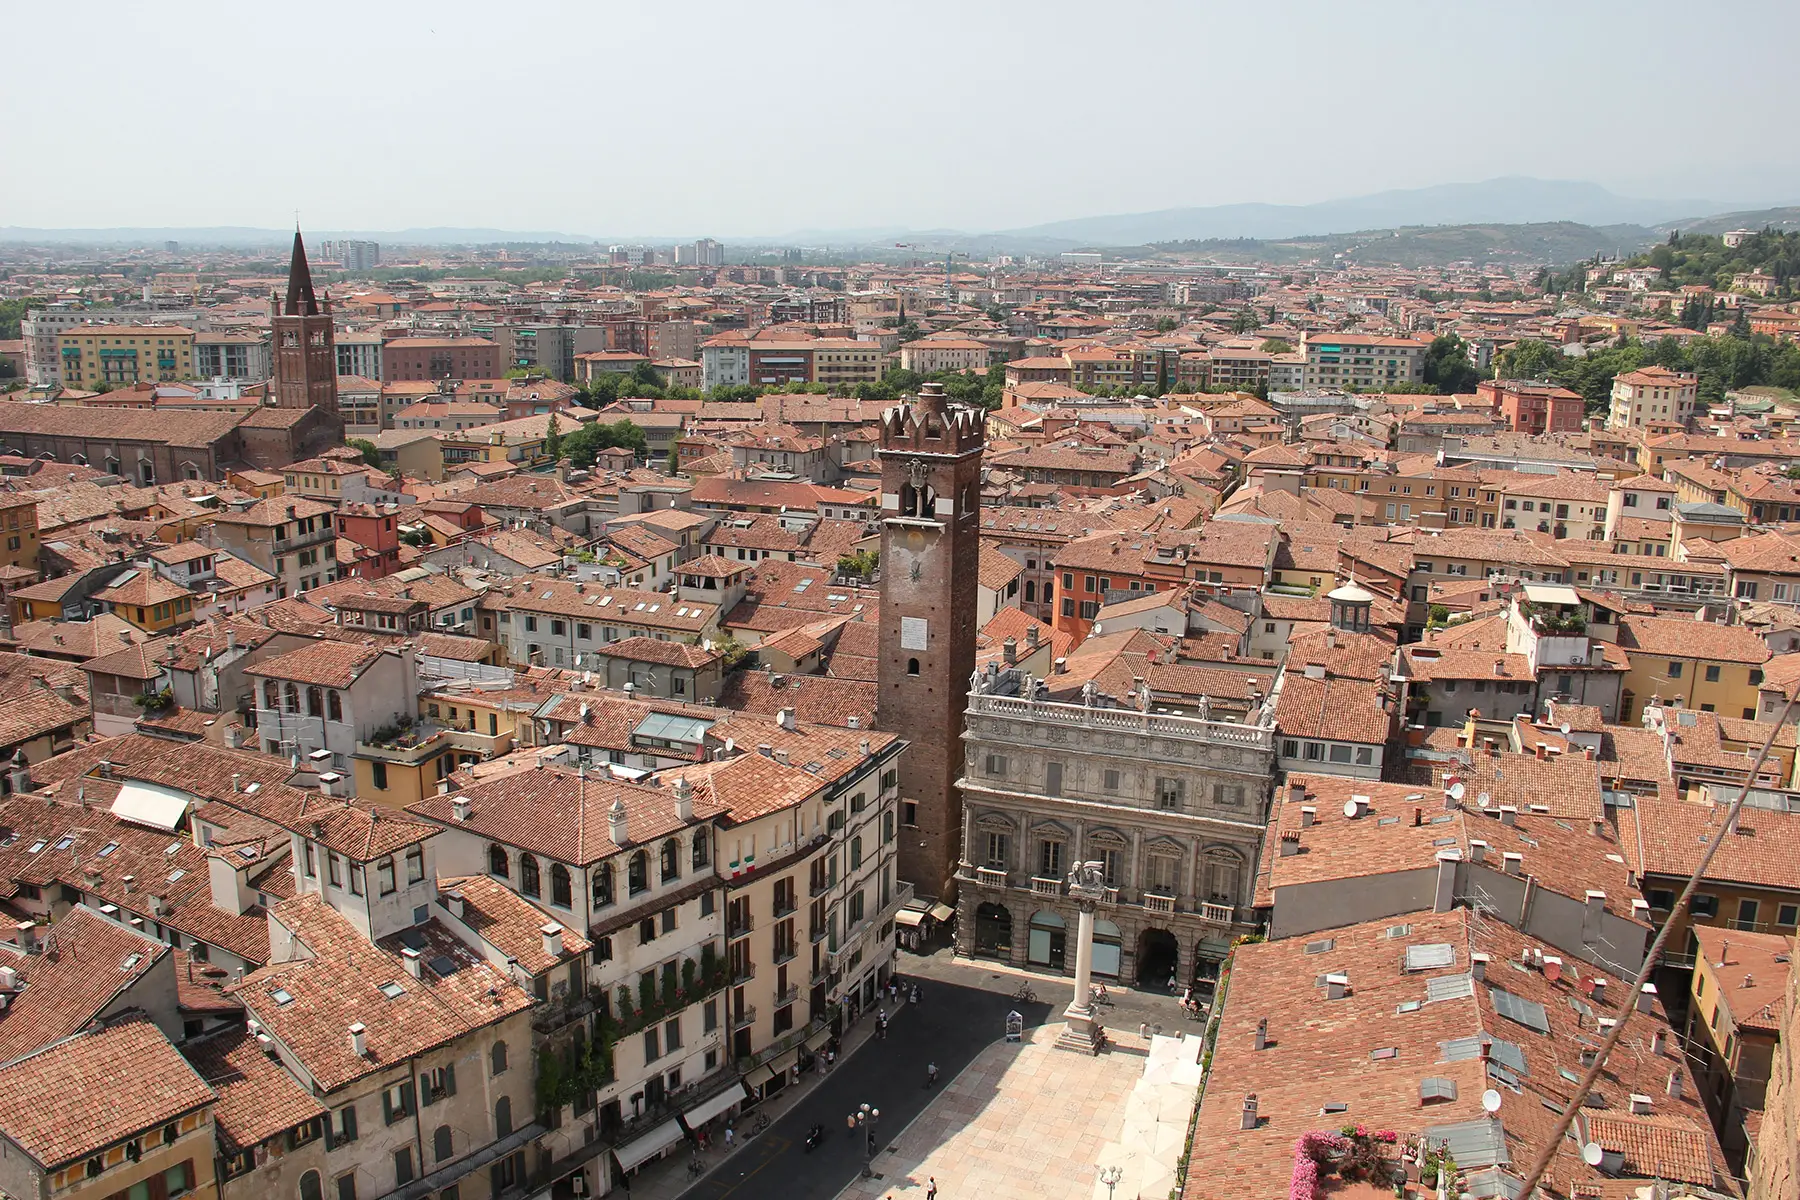 A view of Verona from above